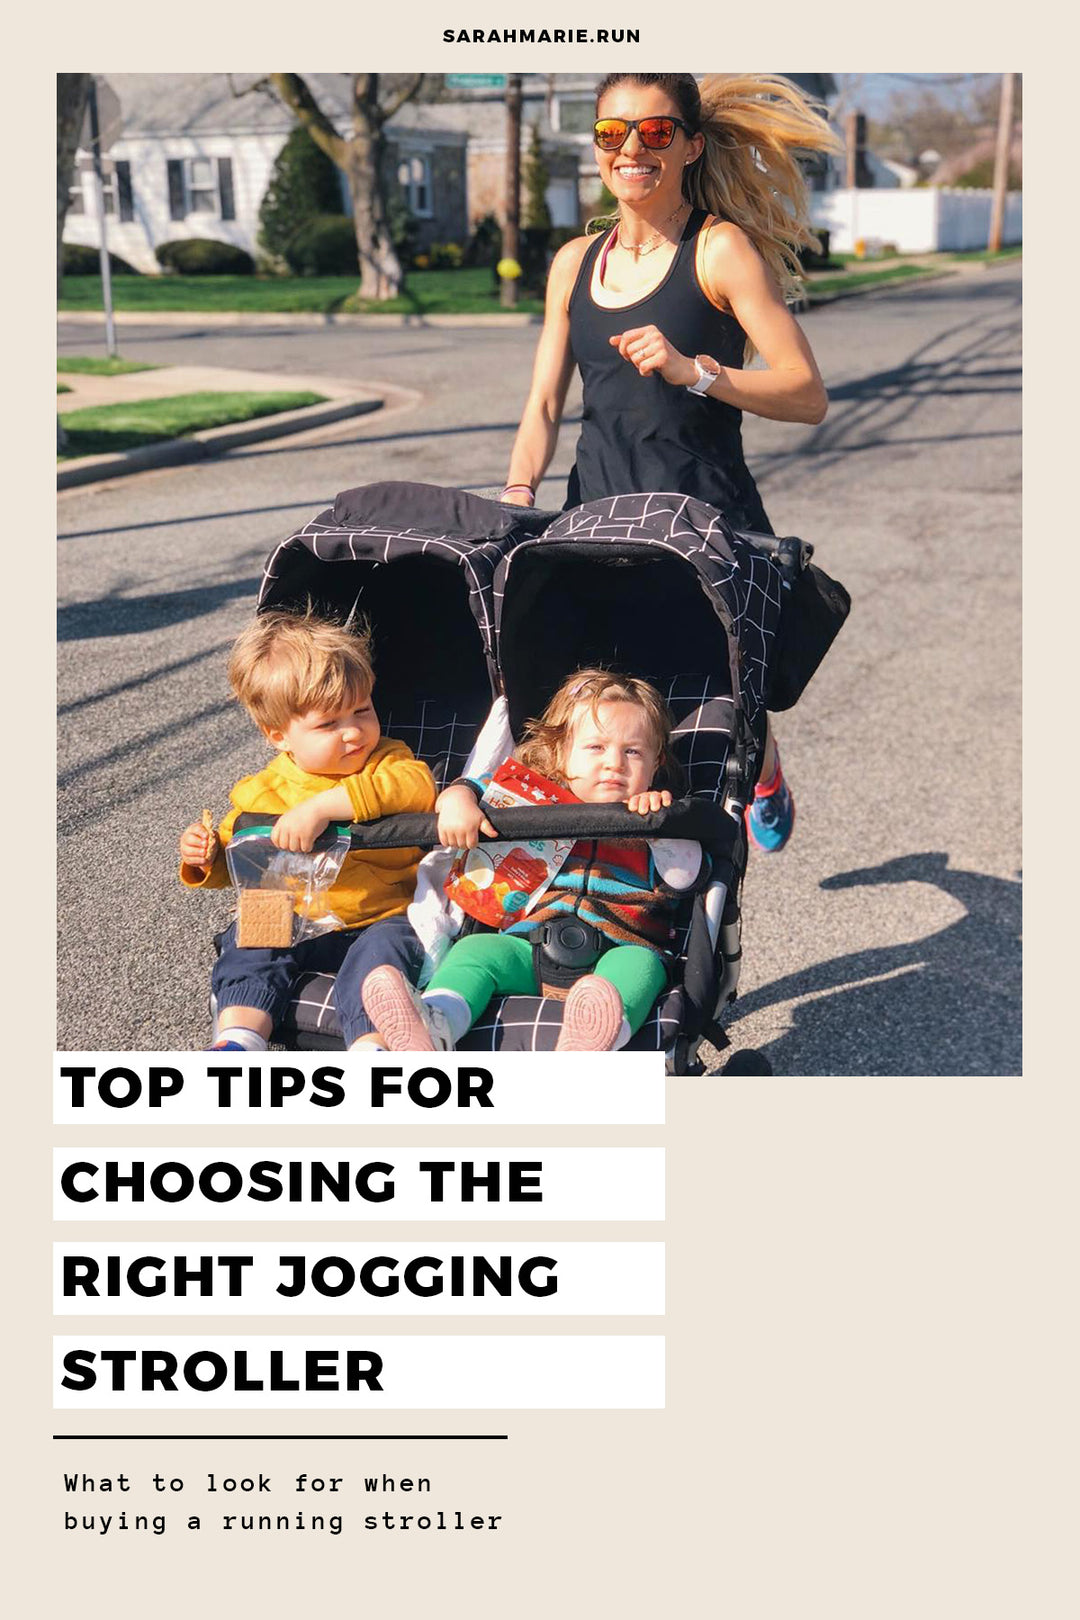 Top Tips for Choosing the Right Jogging Stroller